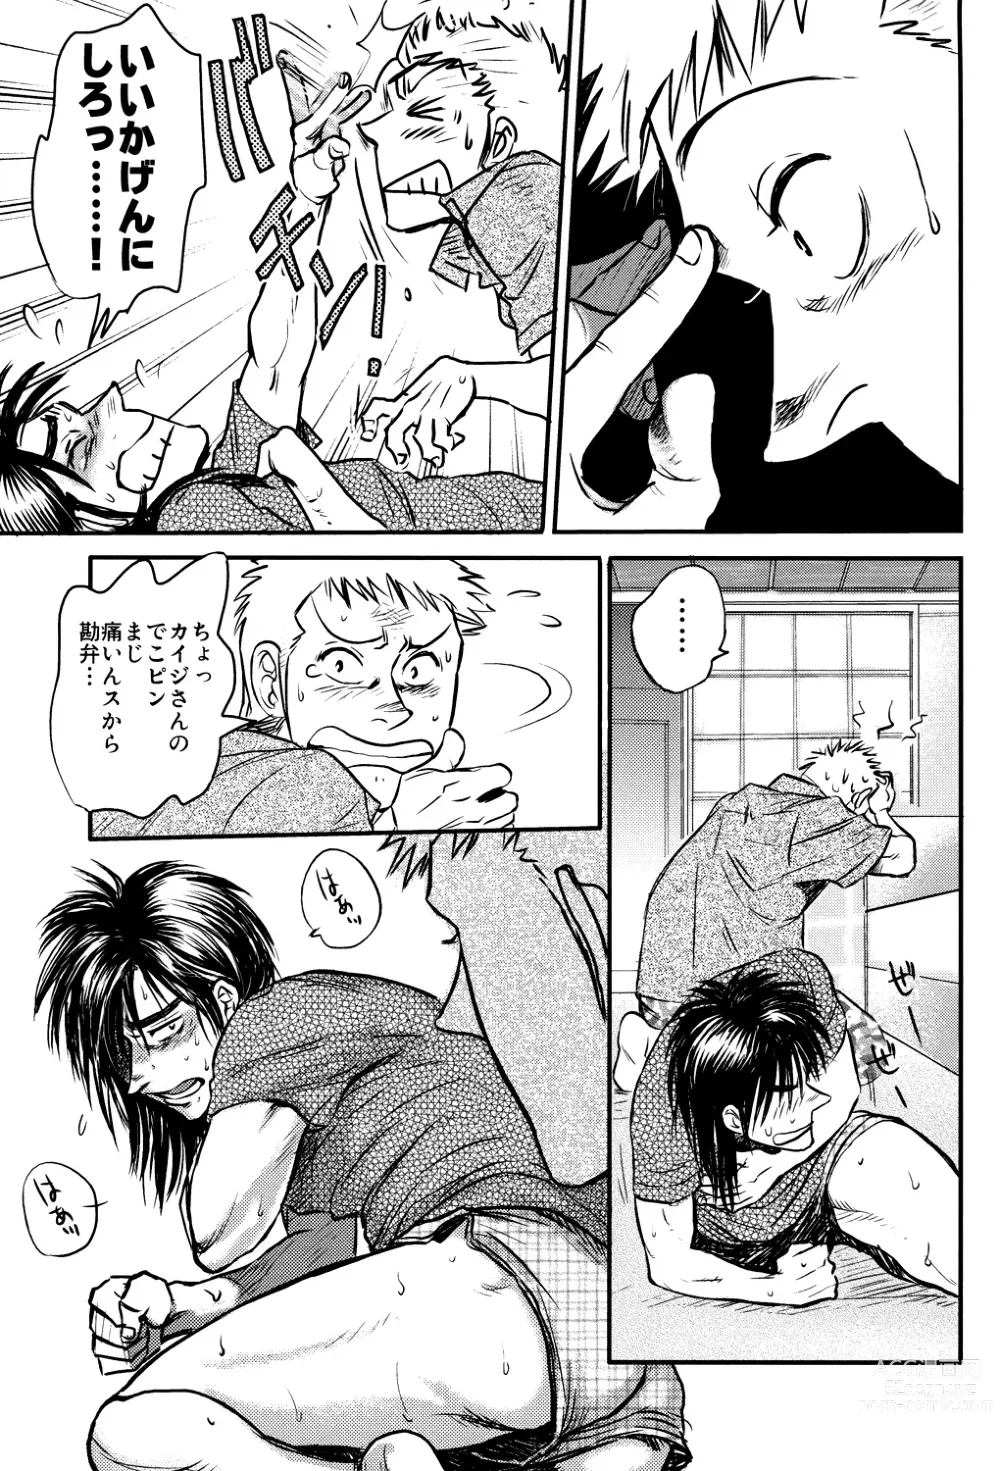 Page 26 of doujinshi Get Up Boys!